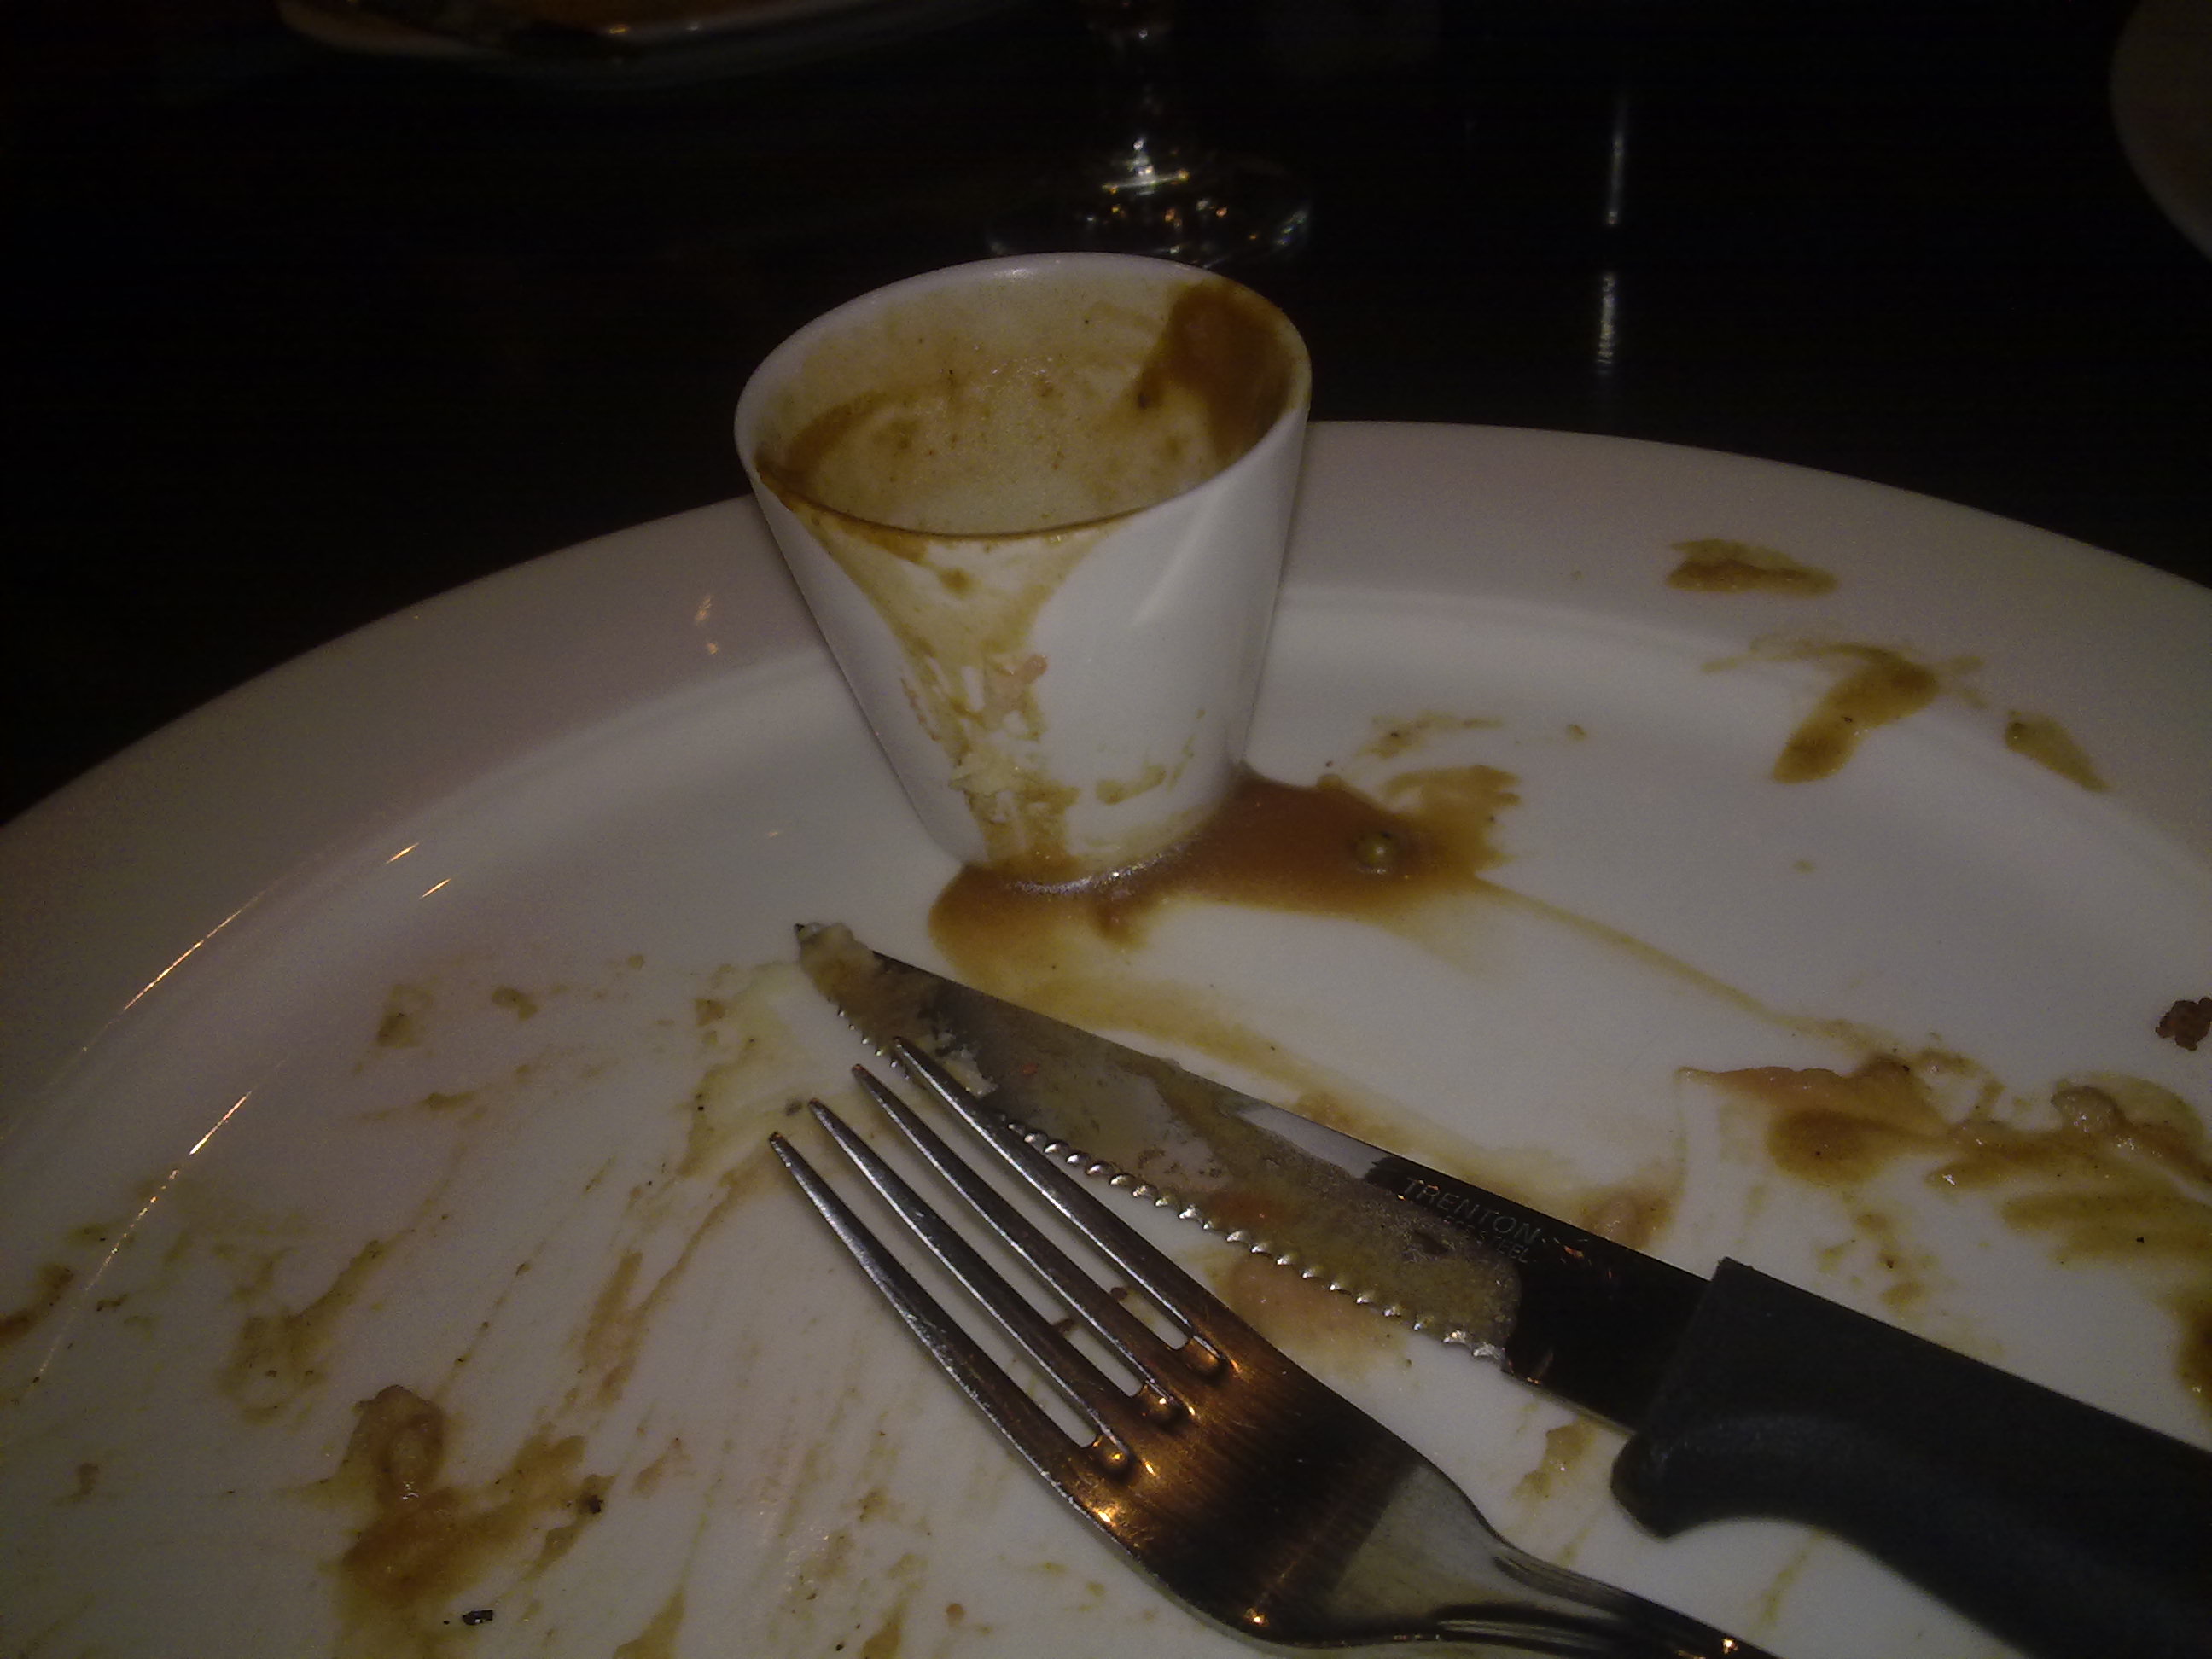 No leftovers for me at the Macquarie Hotel